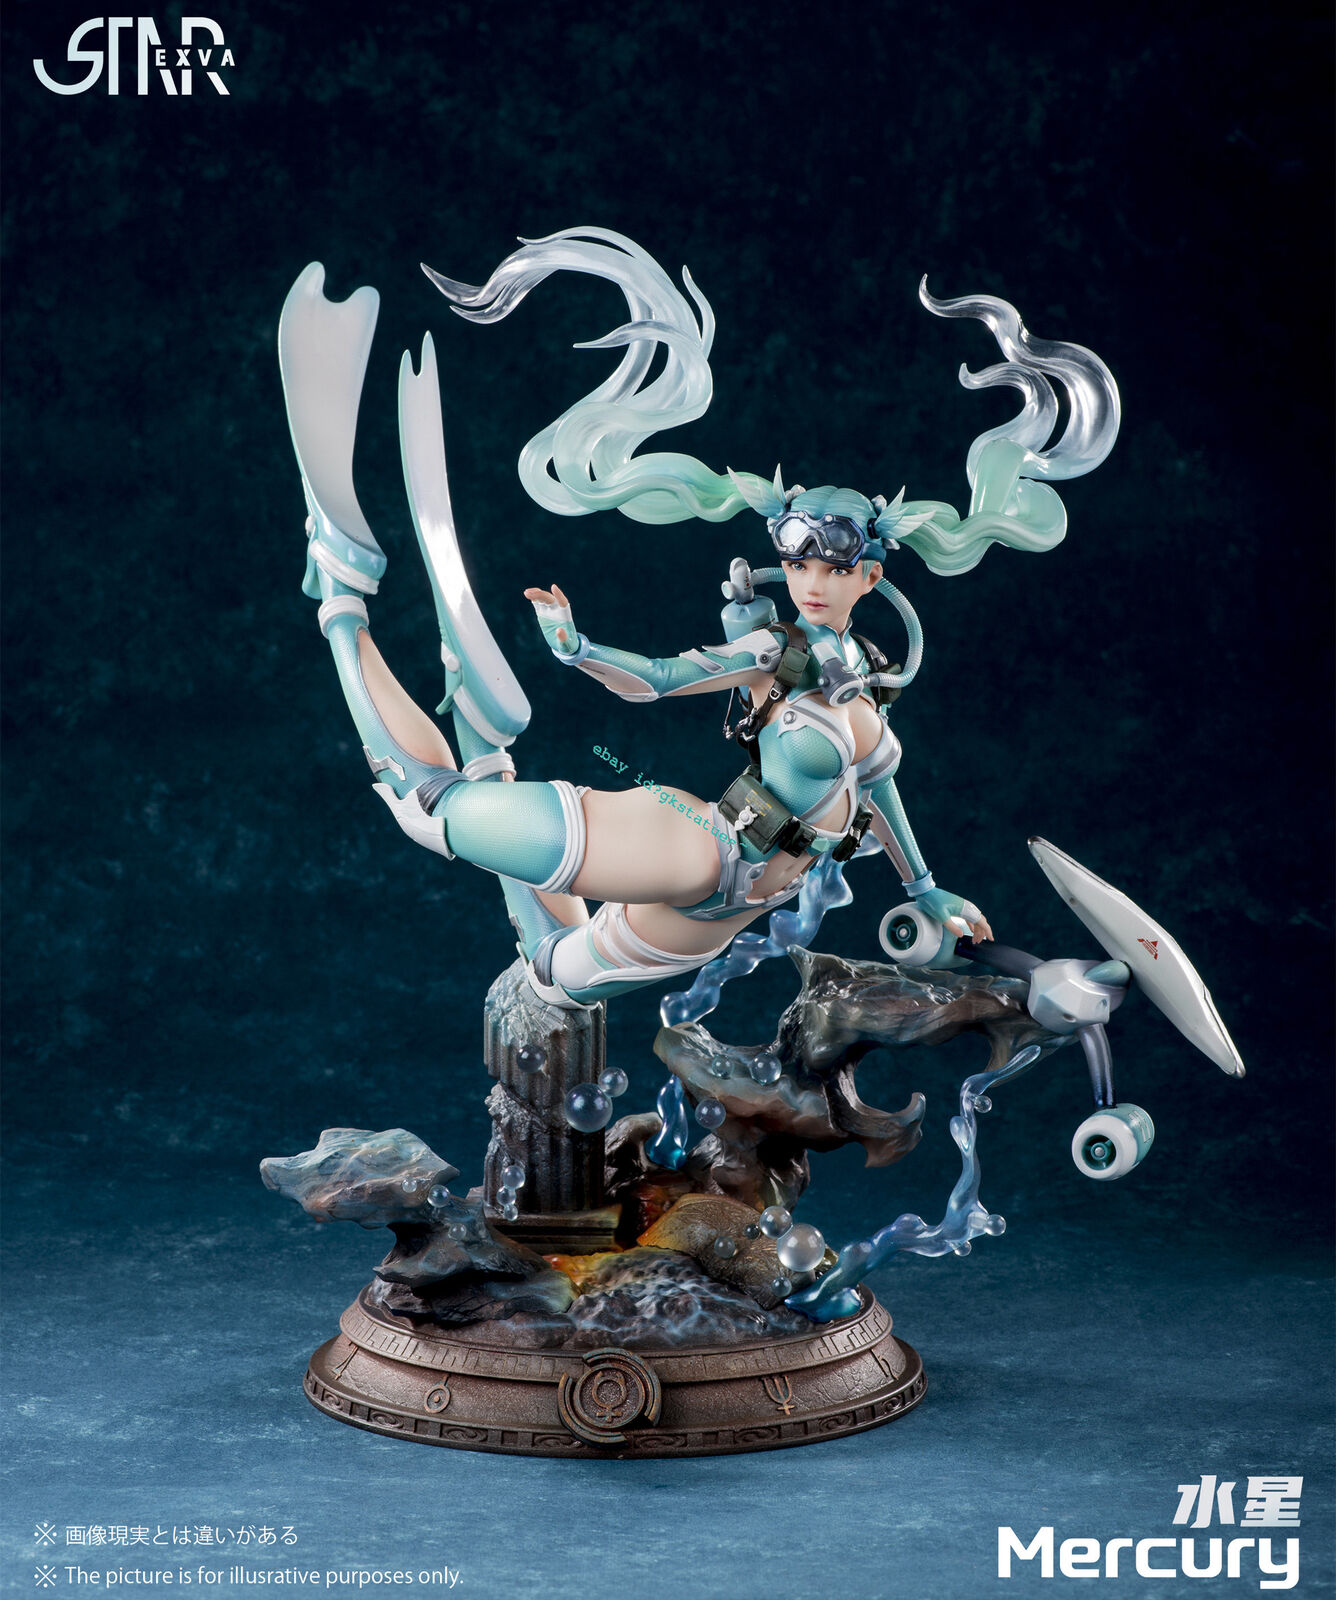 STAREXVA Studio Planet Mercury GK Painted Resin Model Collection Statue In Stock